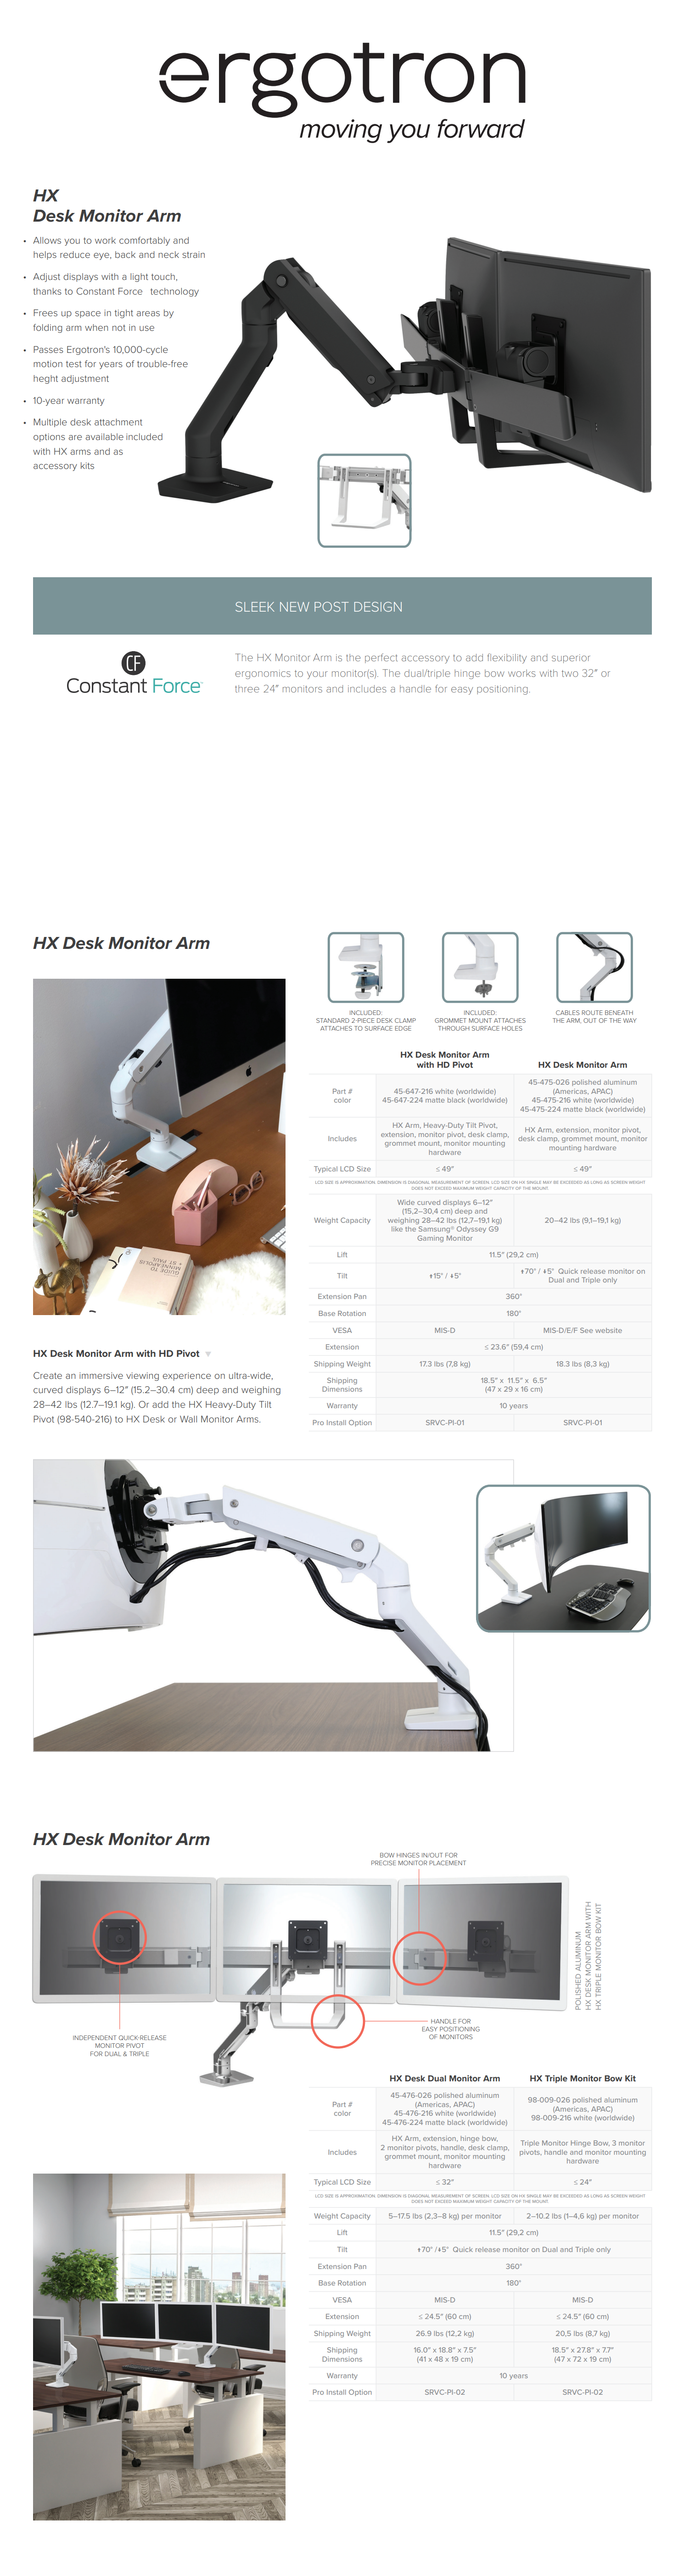 A large marketing image providing additional information about the product Ergotron HX Desk Monitor Arm - Matte Black - Additional alt info not provided